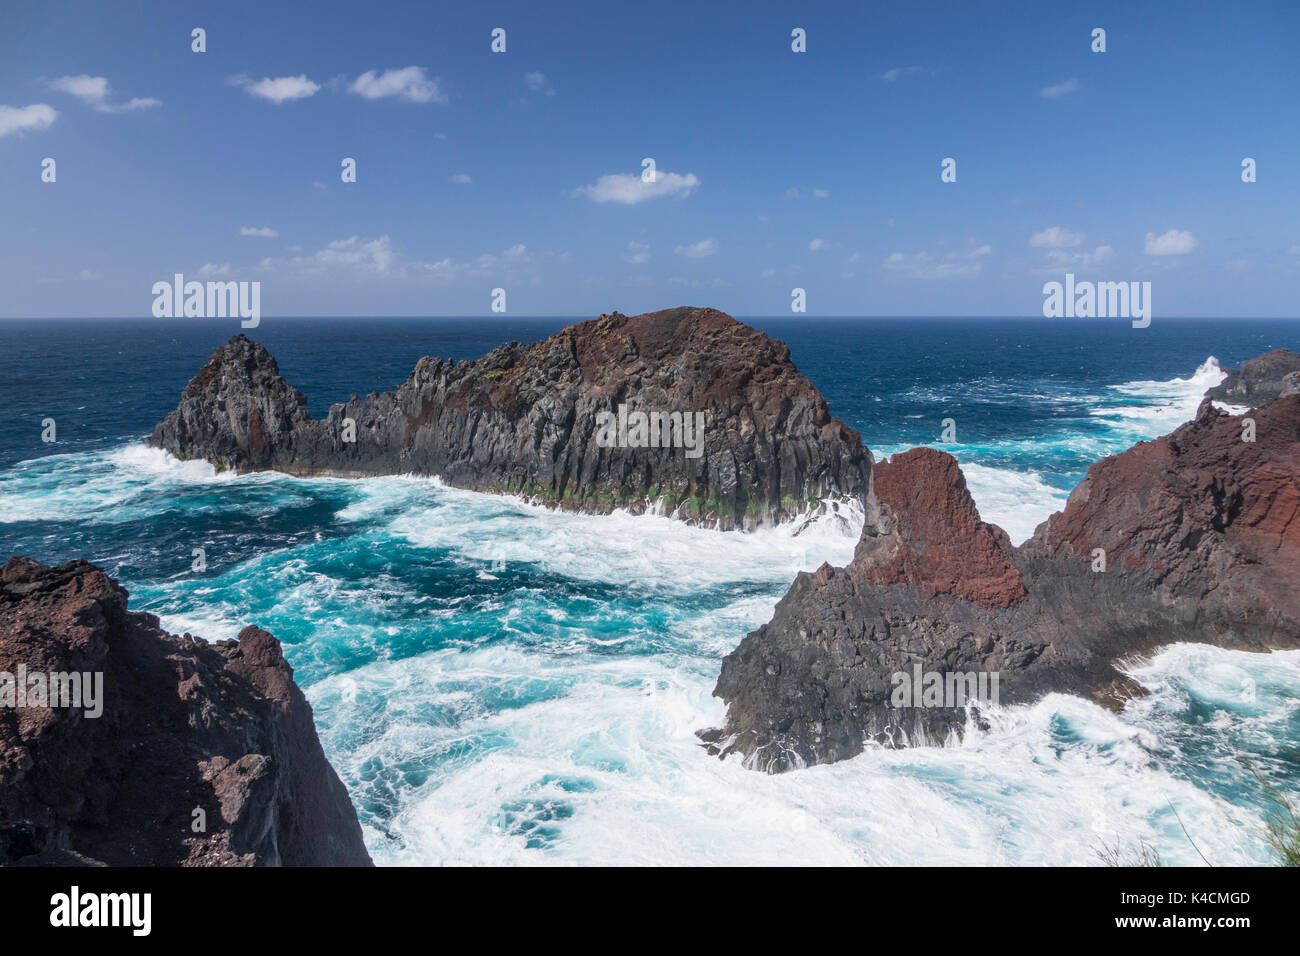 Stone Formation In The North Of Graciosa Washed By The Blue Whiteblown Atlantic, Azores Stock Photo